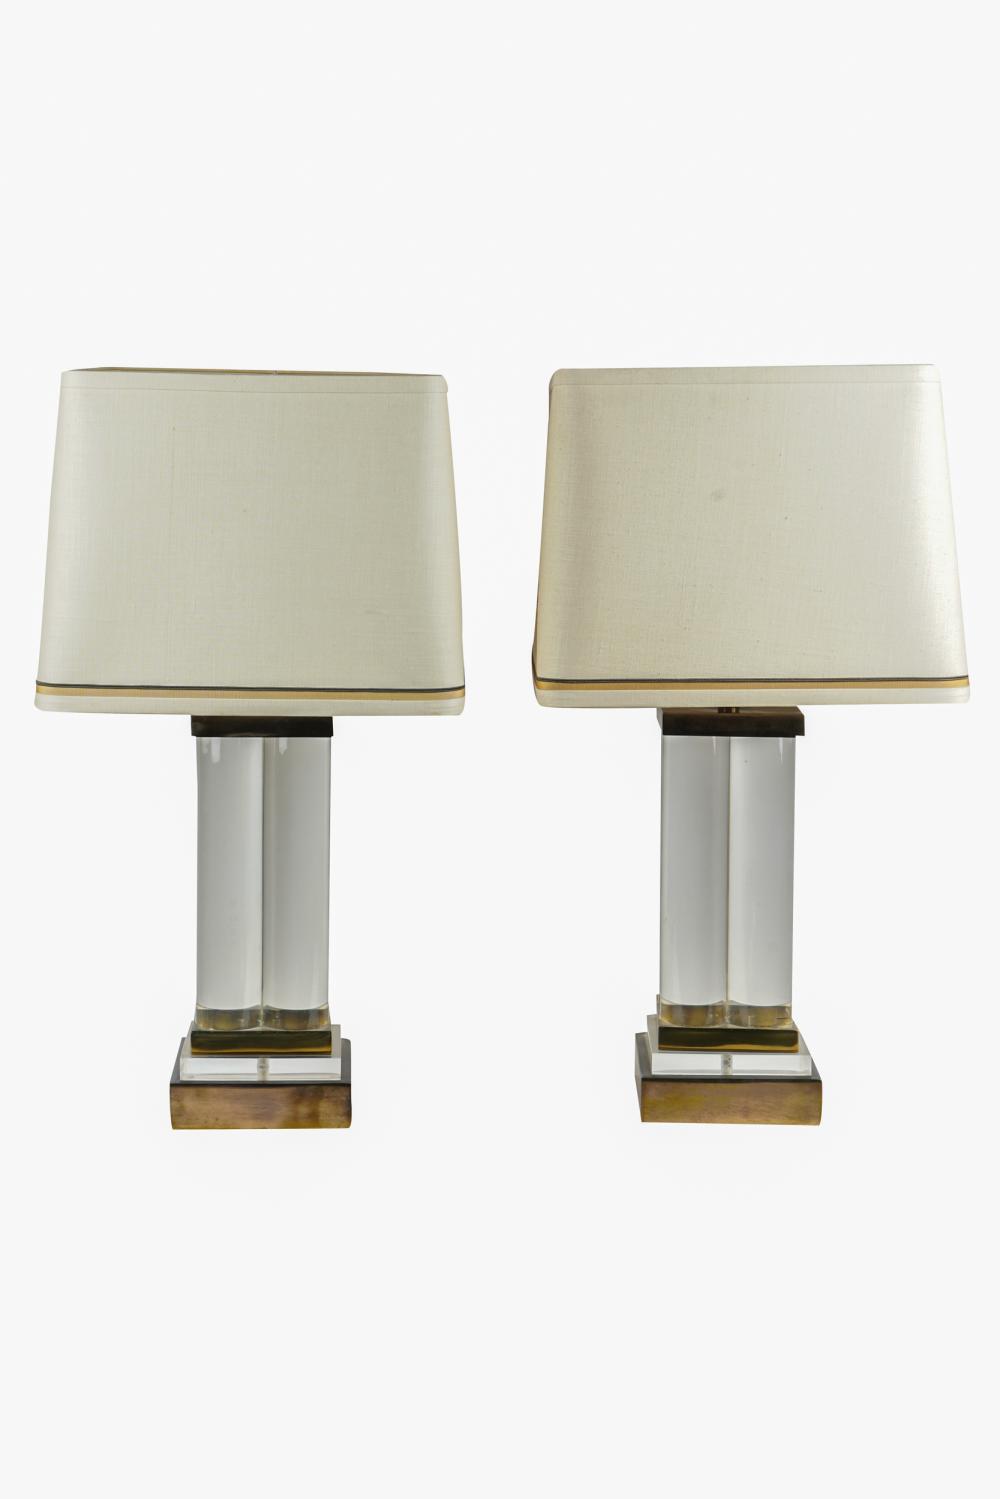 PAIR OF ACRYLIC METAL TABLE LAMPSwith 3372a6